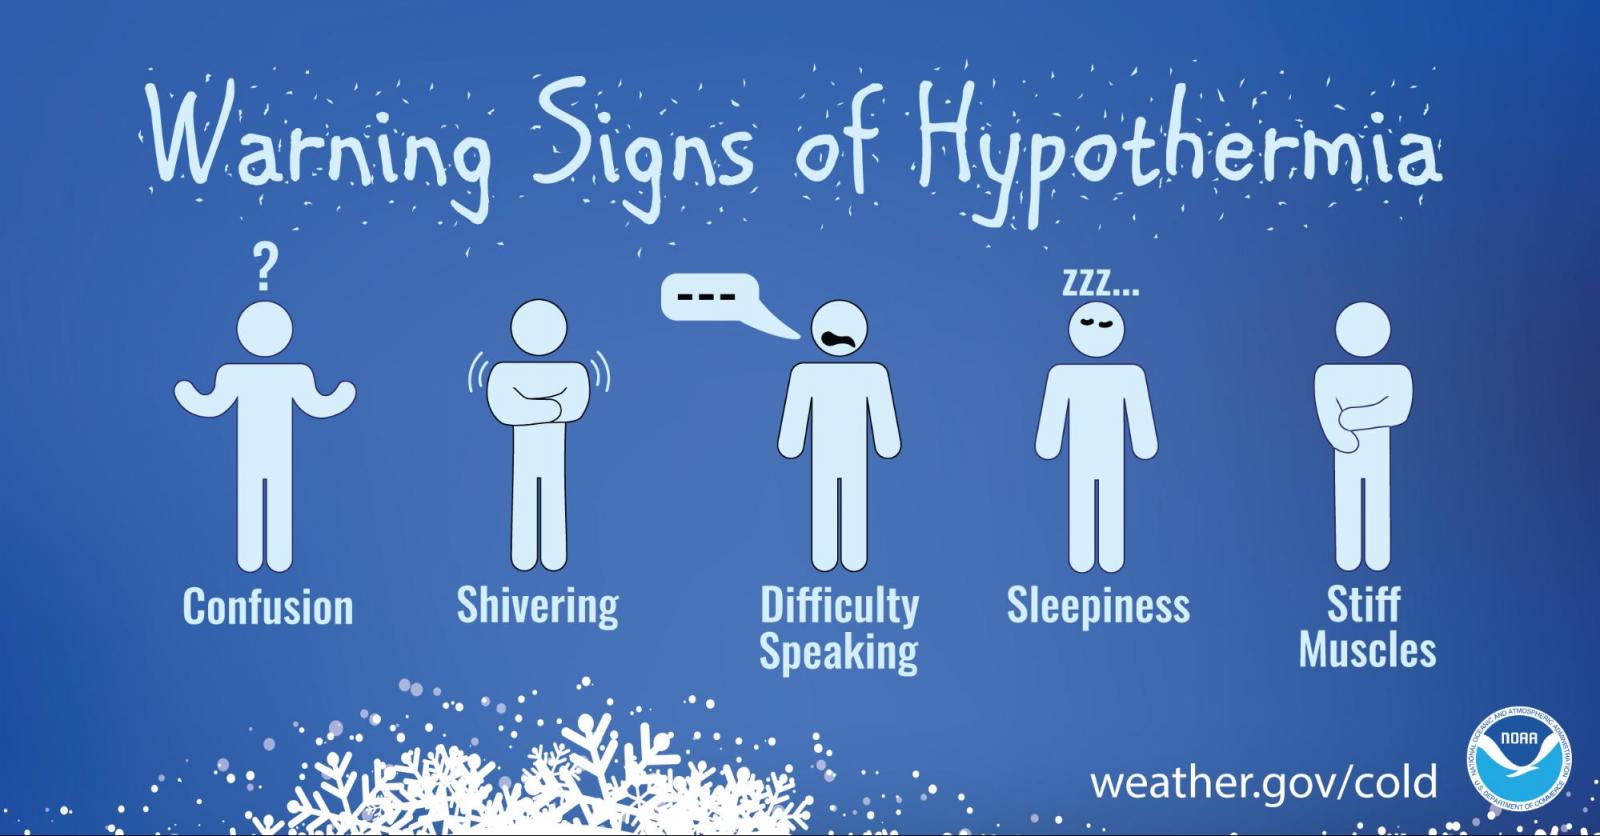 Warnings signs of hypothermia: confusion, shivering, difficulty speaking, sleepiness, stiff muscles.